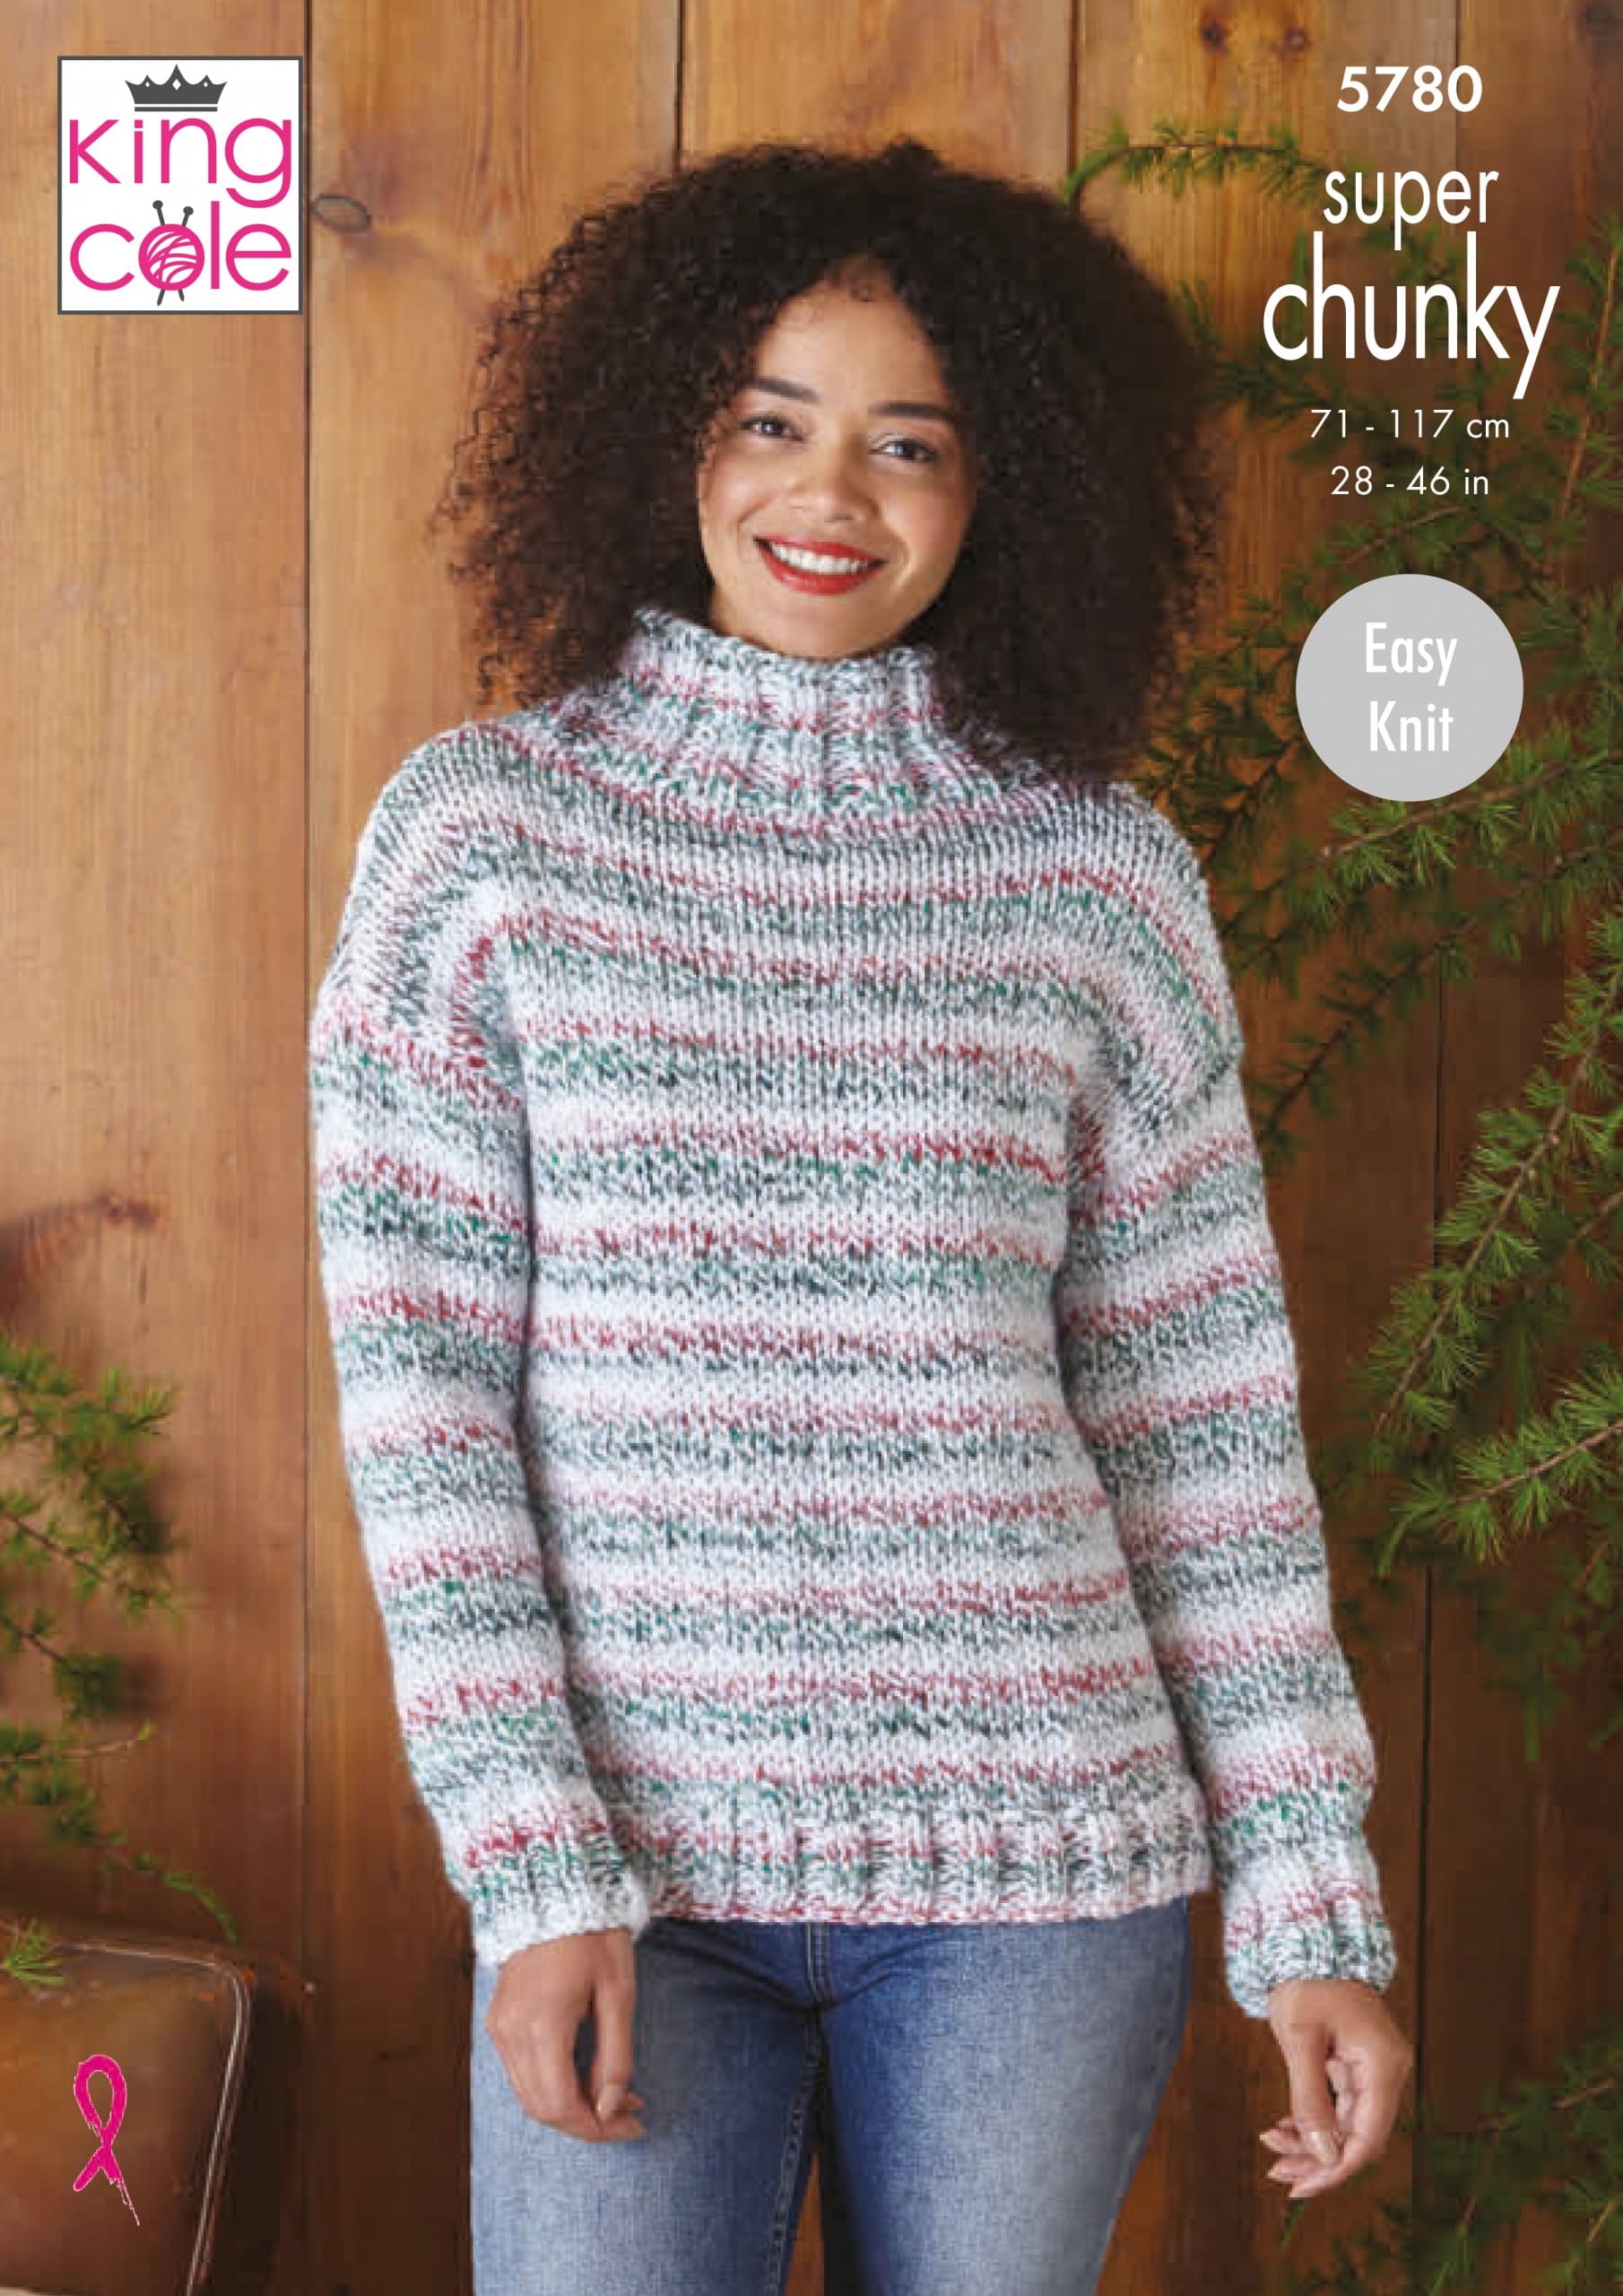 Easy to Follow Cardigan & Sweater Knitted in Christmas